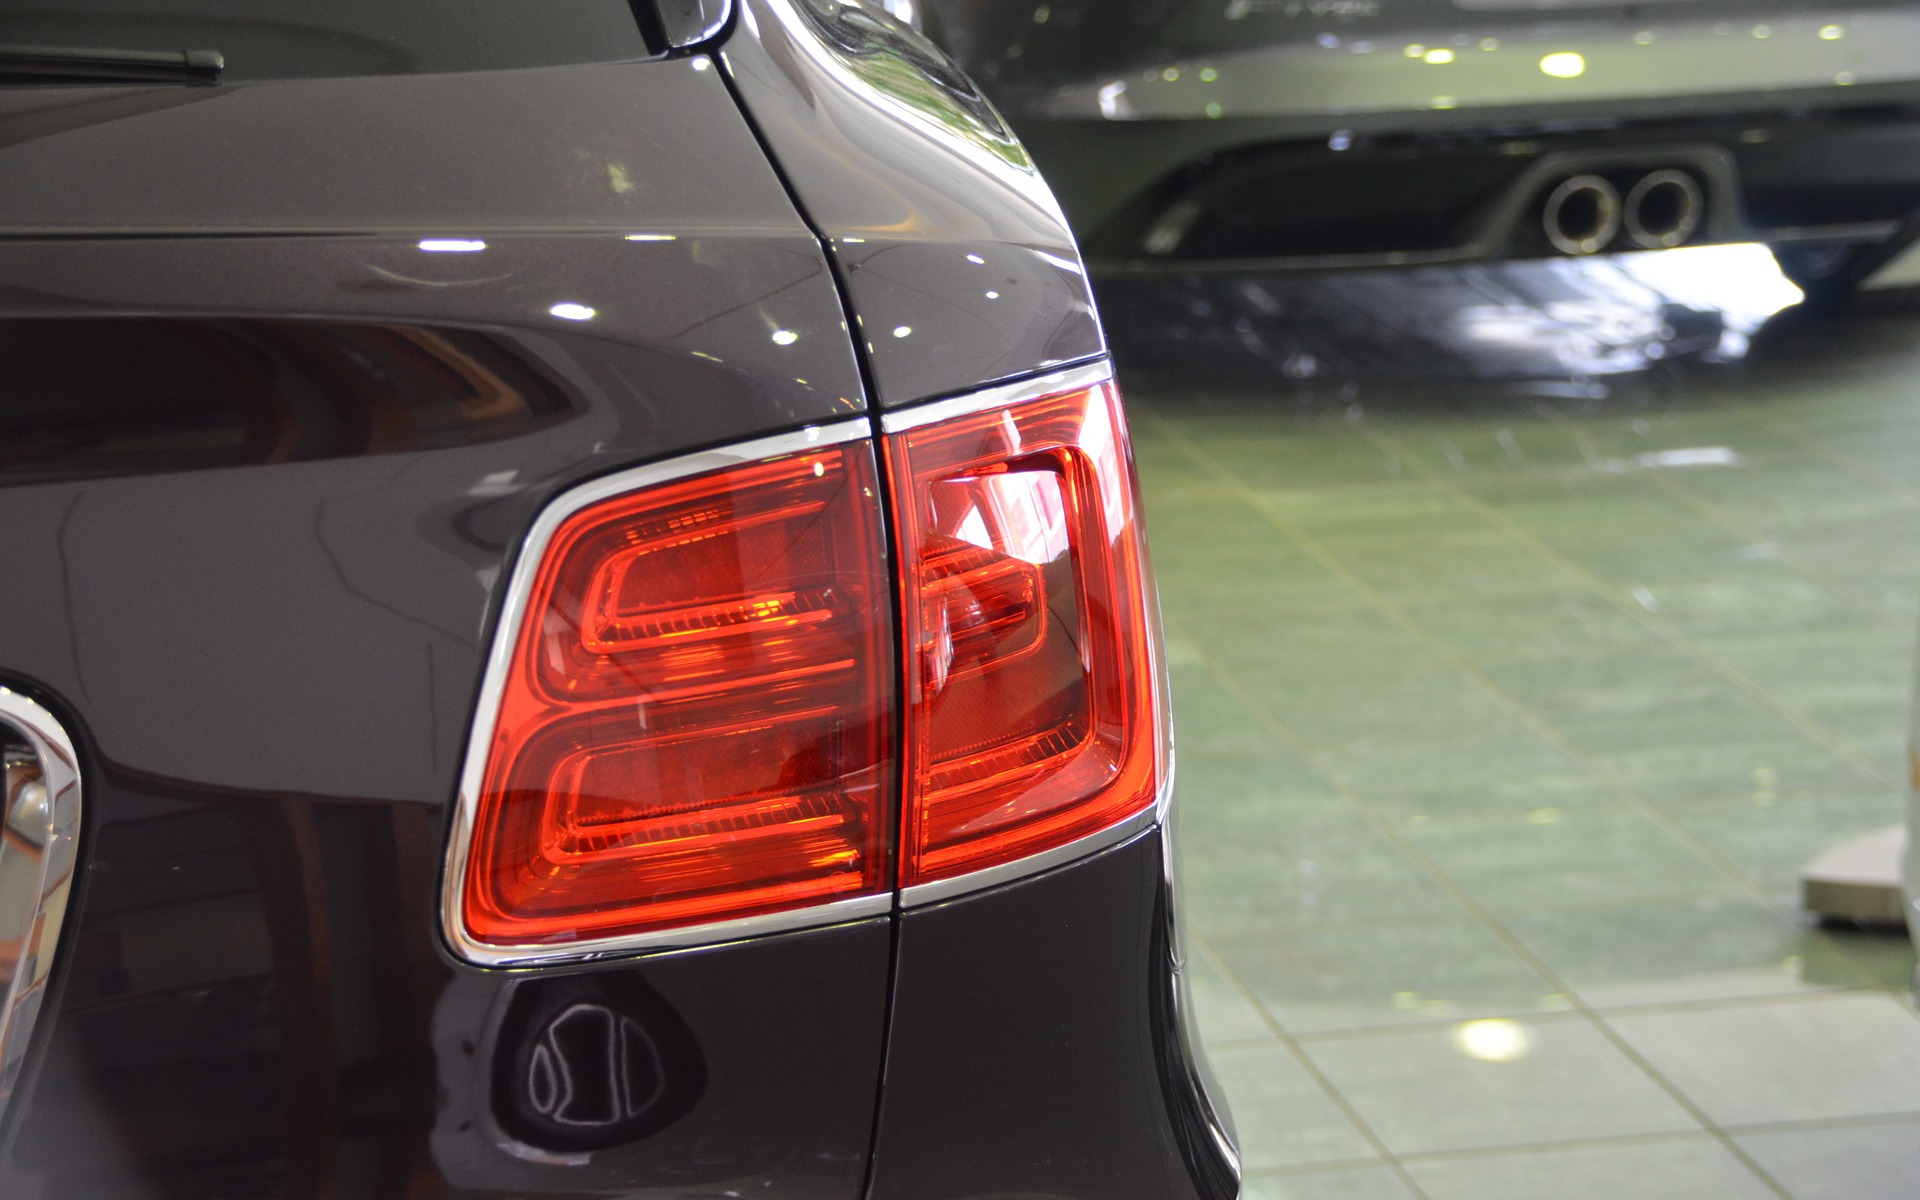 Can you spot the inversed "B" in the Bentayga's taillight design?